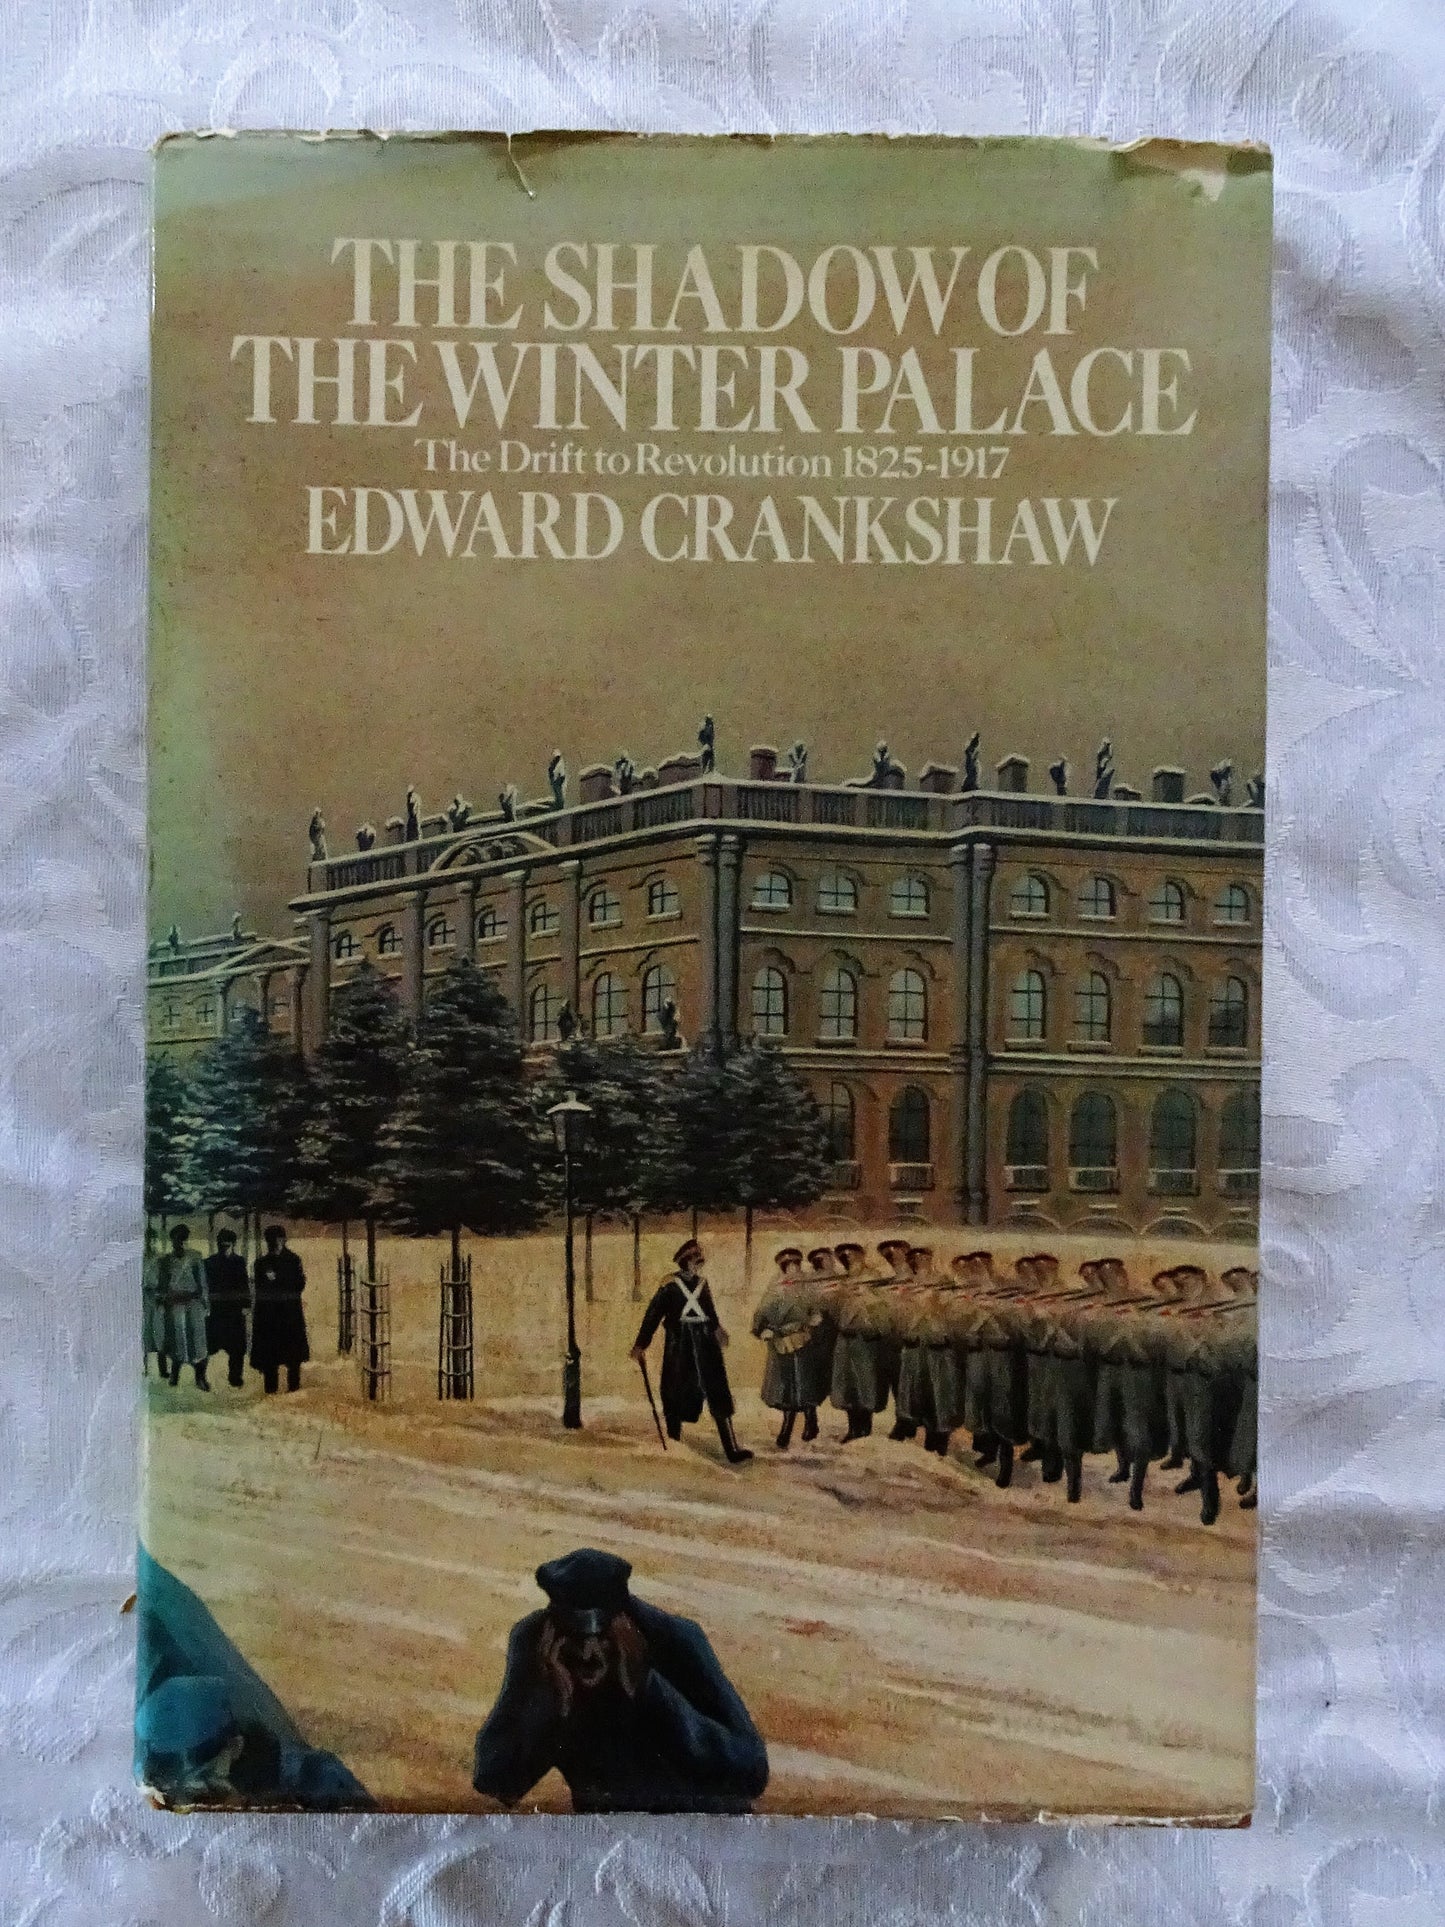 The Shadow of the Winter Palace by Edward Crankshaw